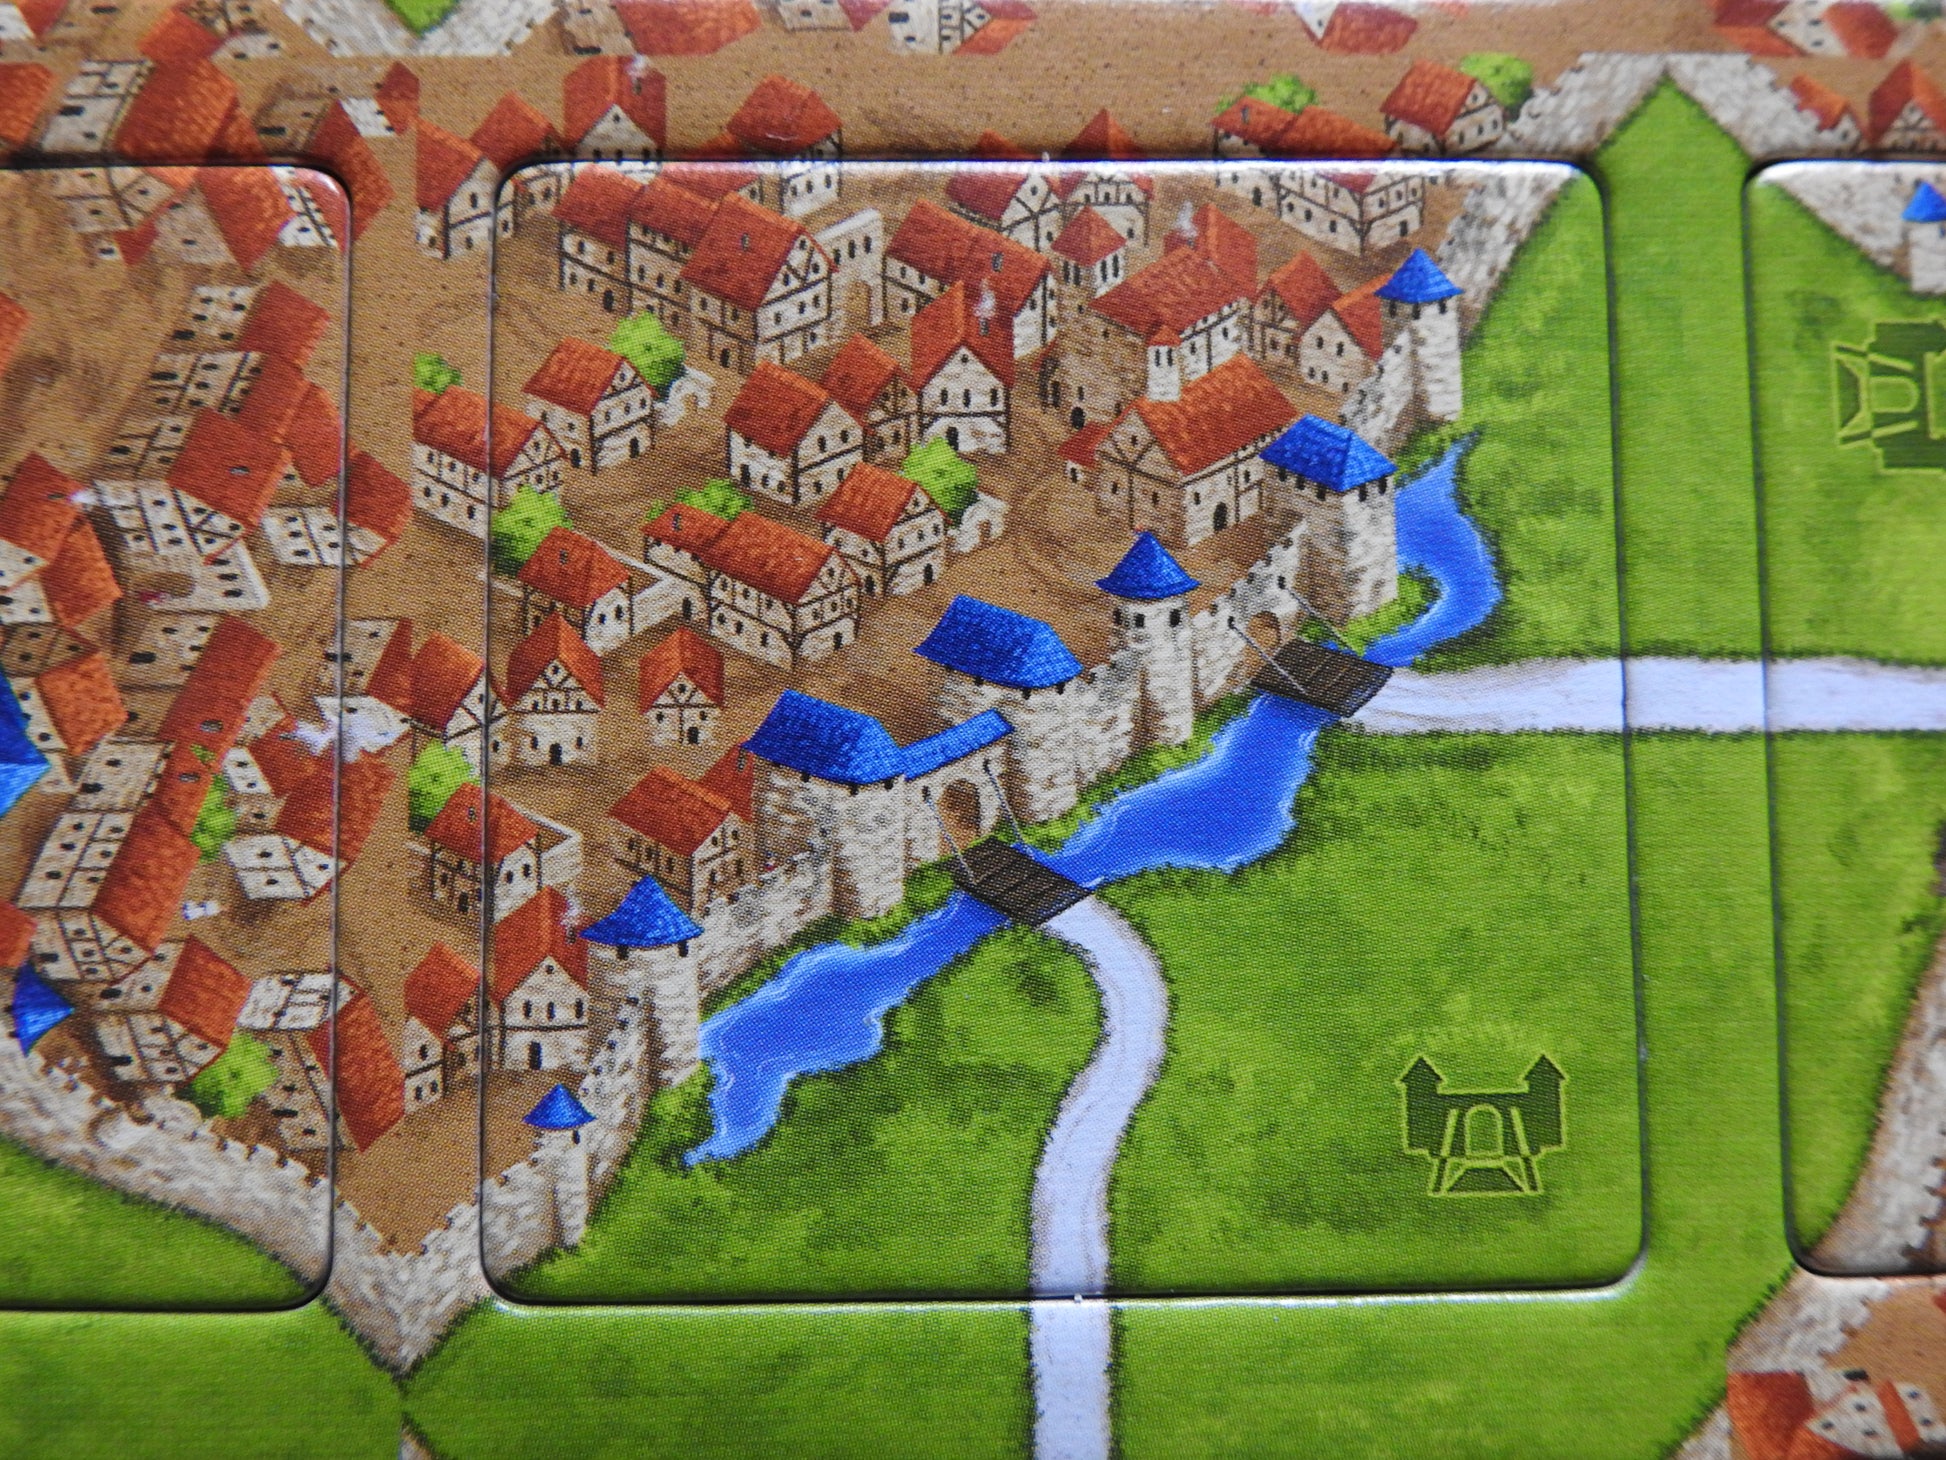 Another close-up view of one of the drawbridge tiles in this Carcassonne Drawbridges mini expansion.